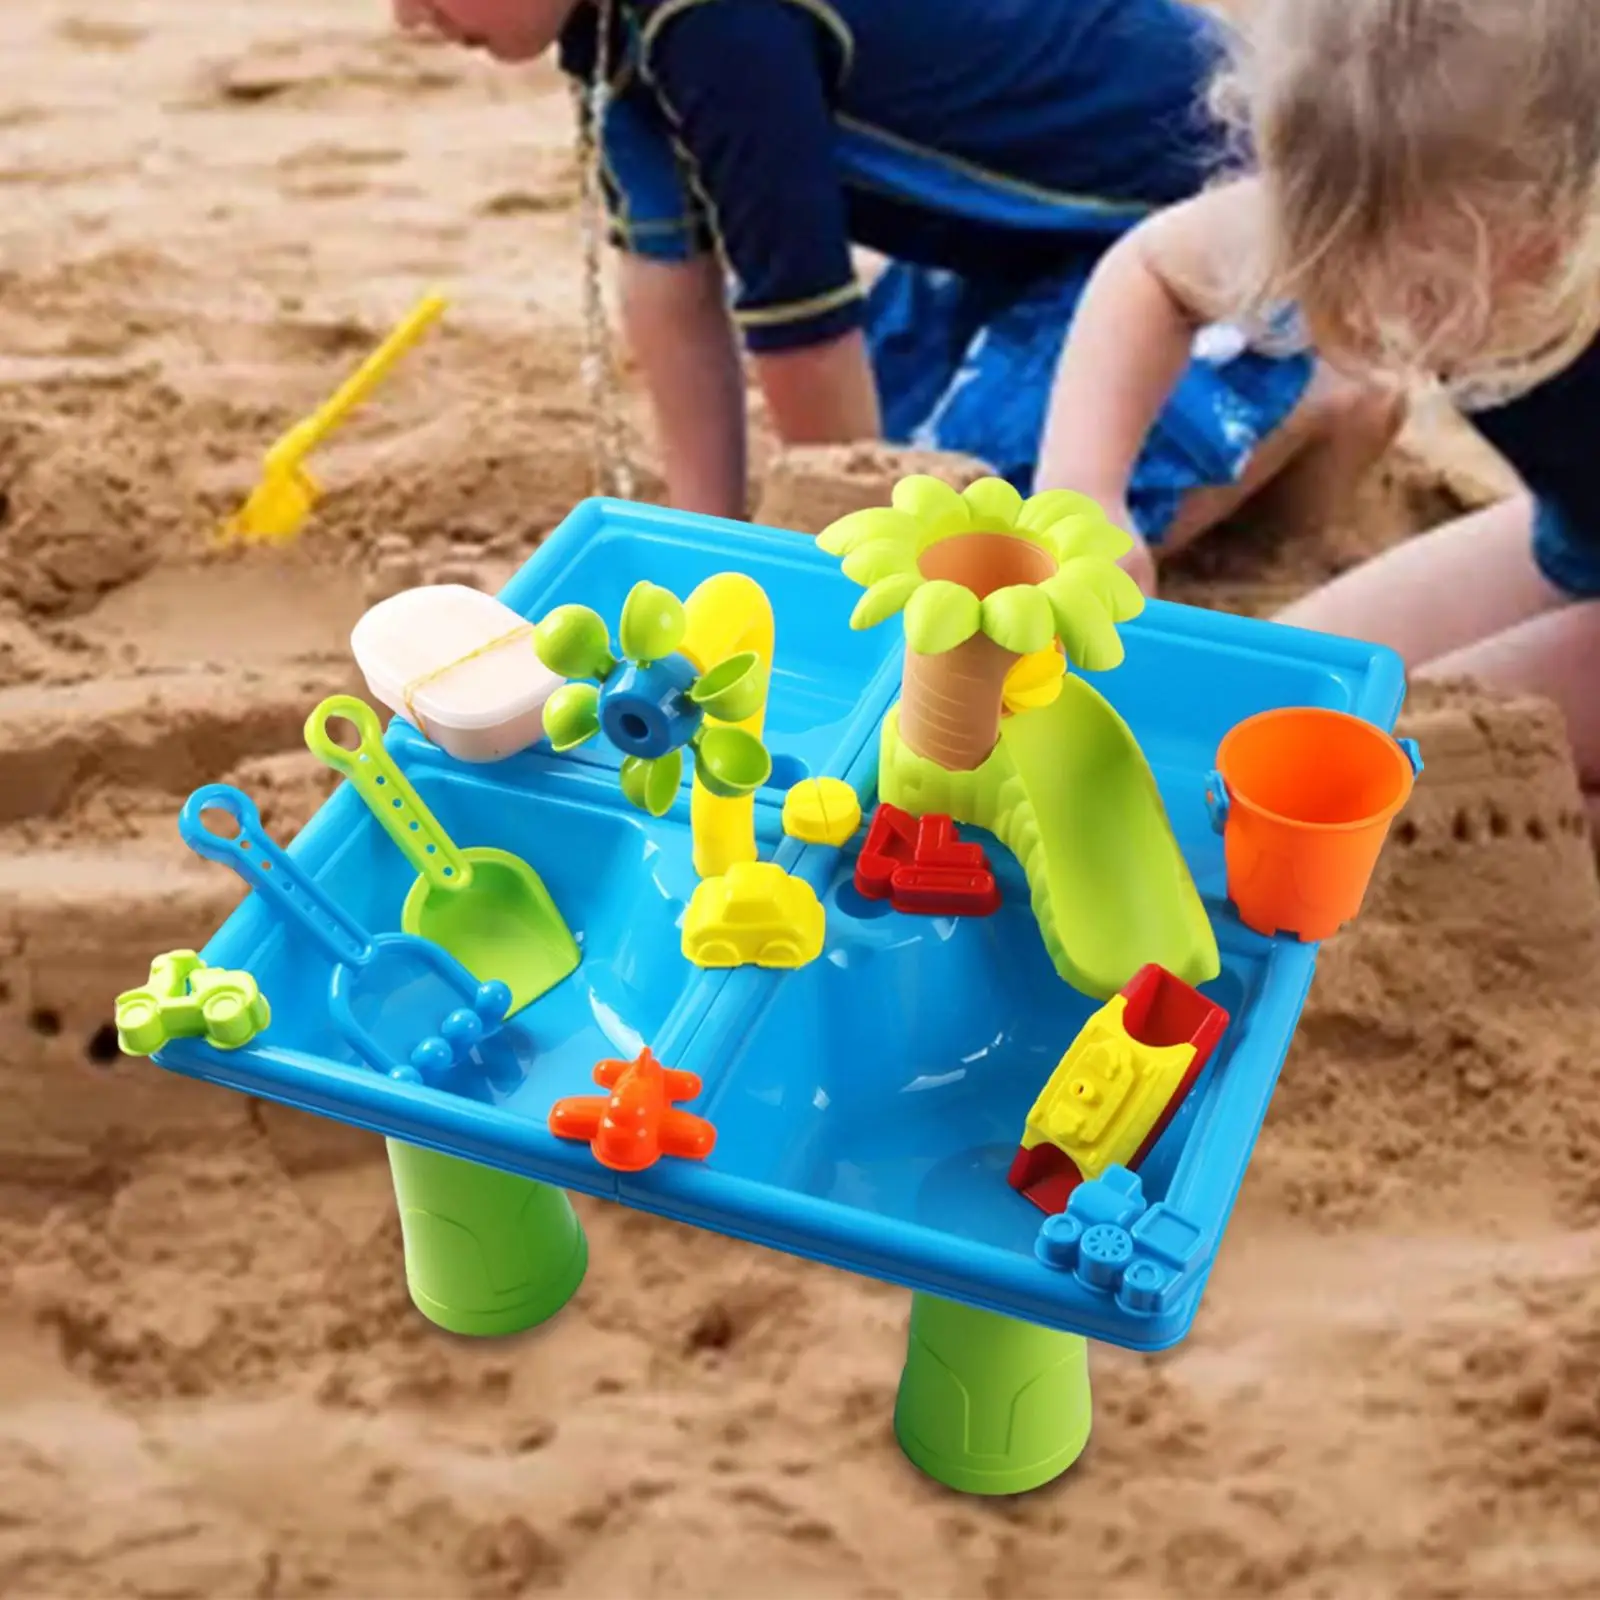 24Pcs Water Table Interactive Social Play Activity Beach Outdoor Outside Sandbox Table Playset for Kids Birthday Gifts